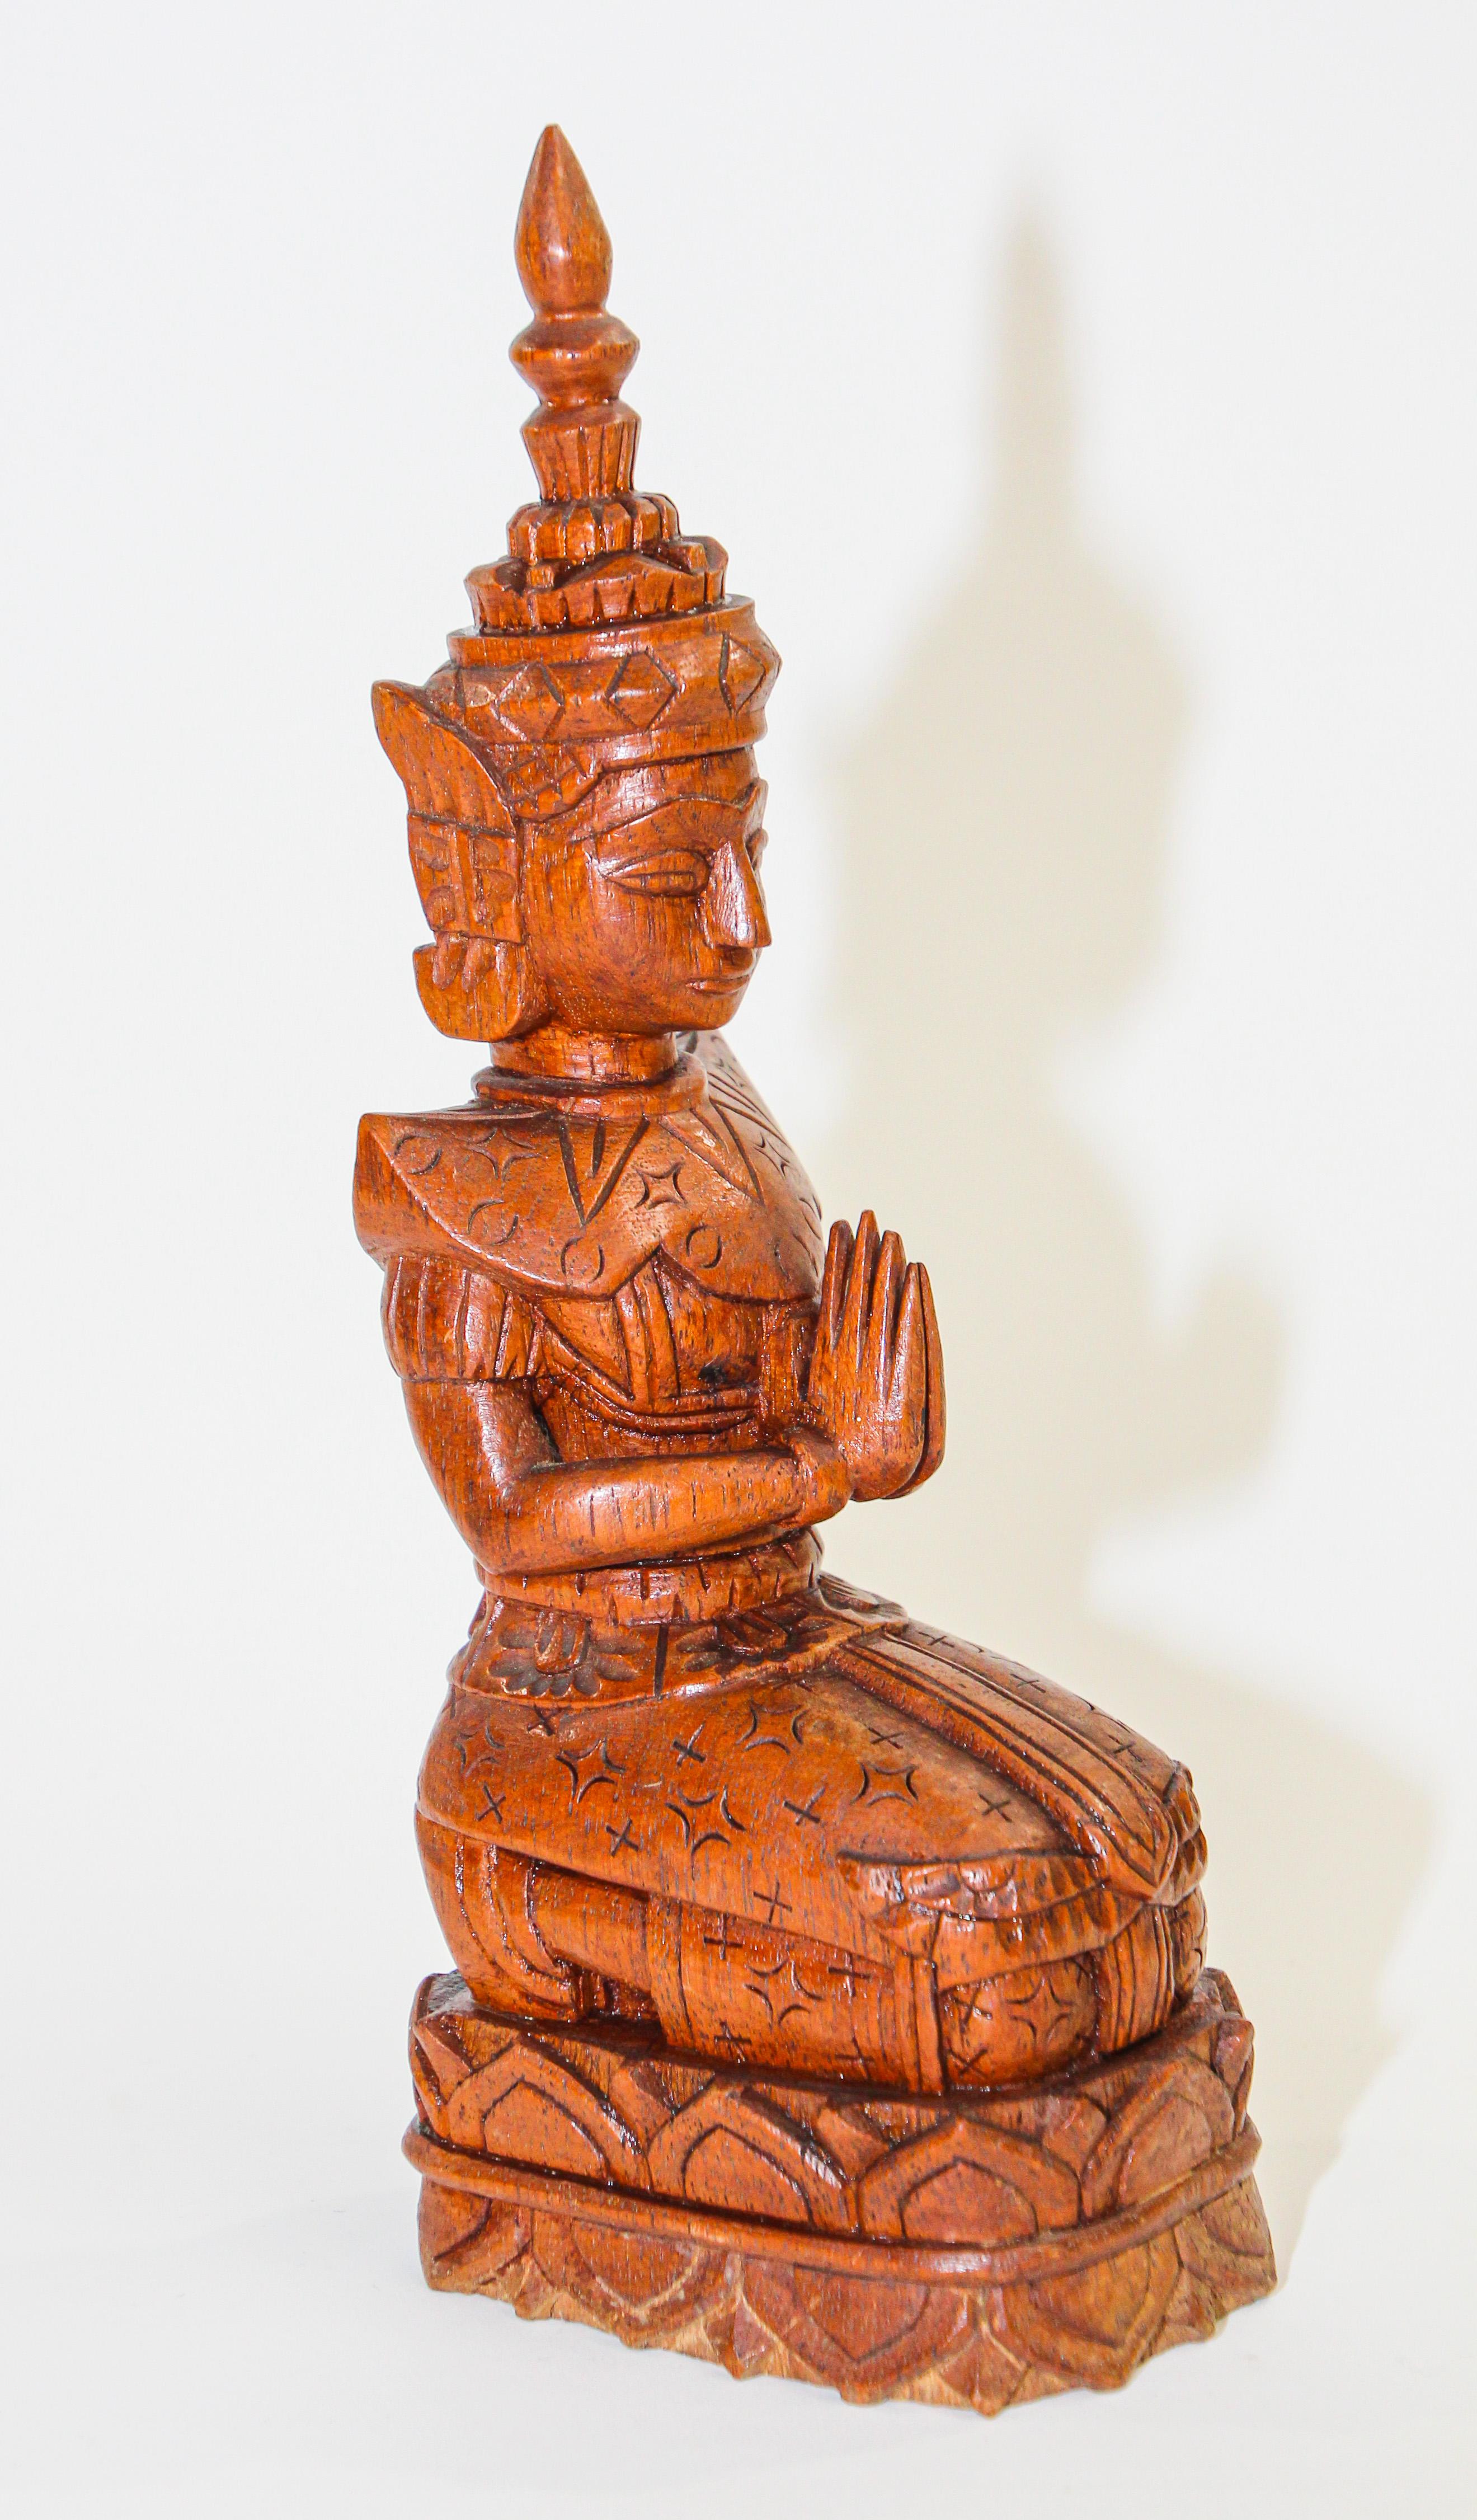 Vintage Wood Carving Art Thai Buddha Figure kneeling and praying.
Vintage Mid century wood carving art of a peaceful Thai female figure kneeling and praying. 
Beautifully detailed figurine reproduction of a classic Thai style Thepanom, an Aparasa